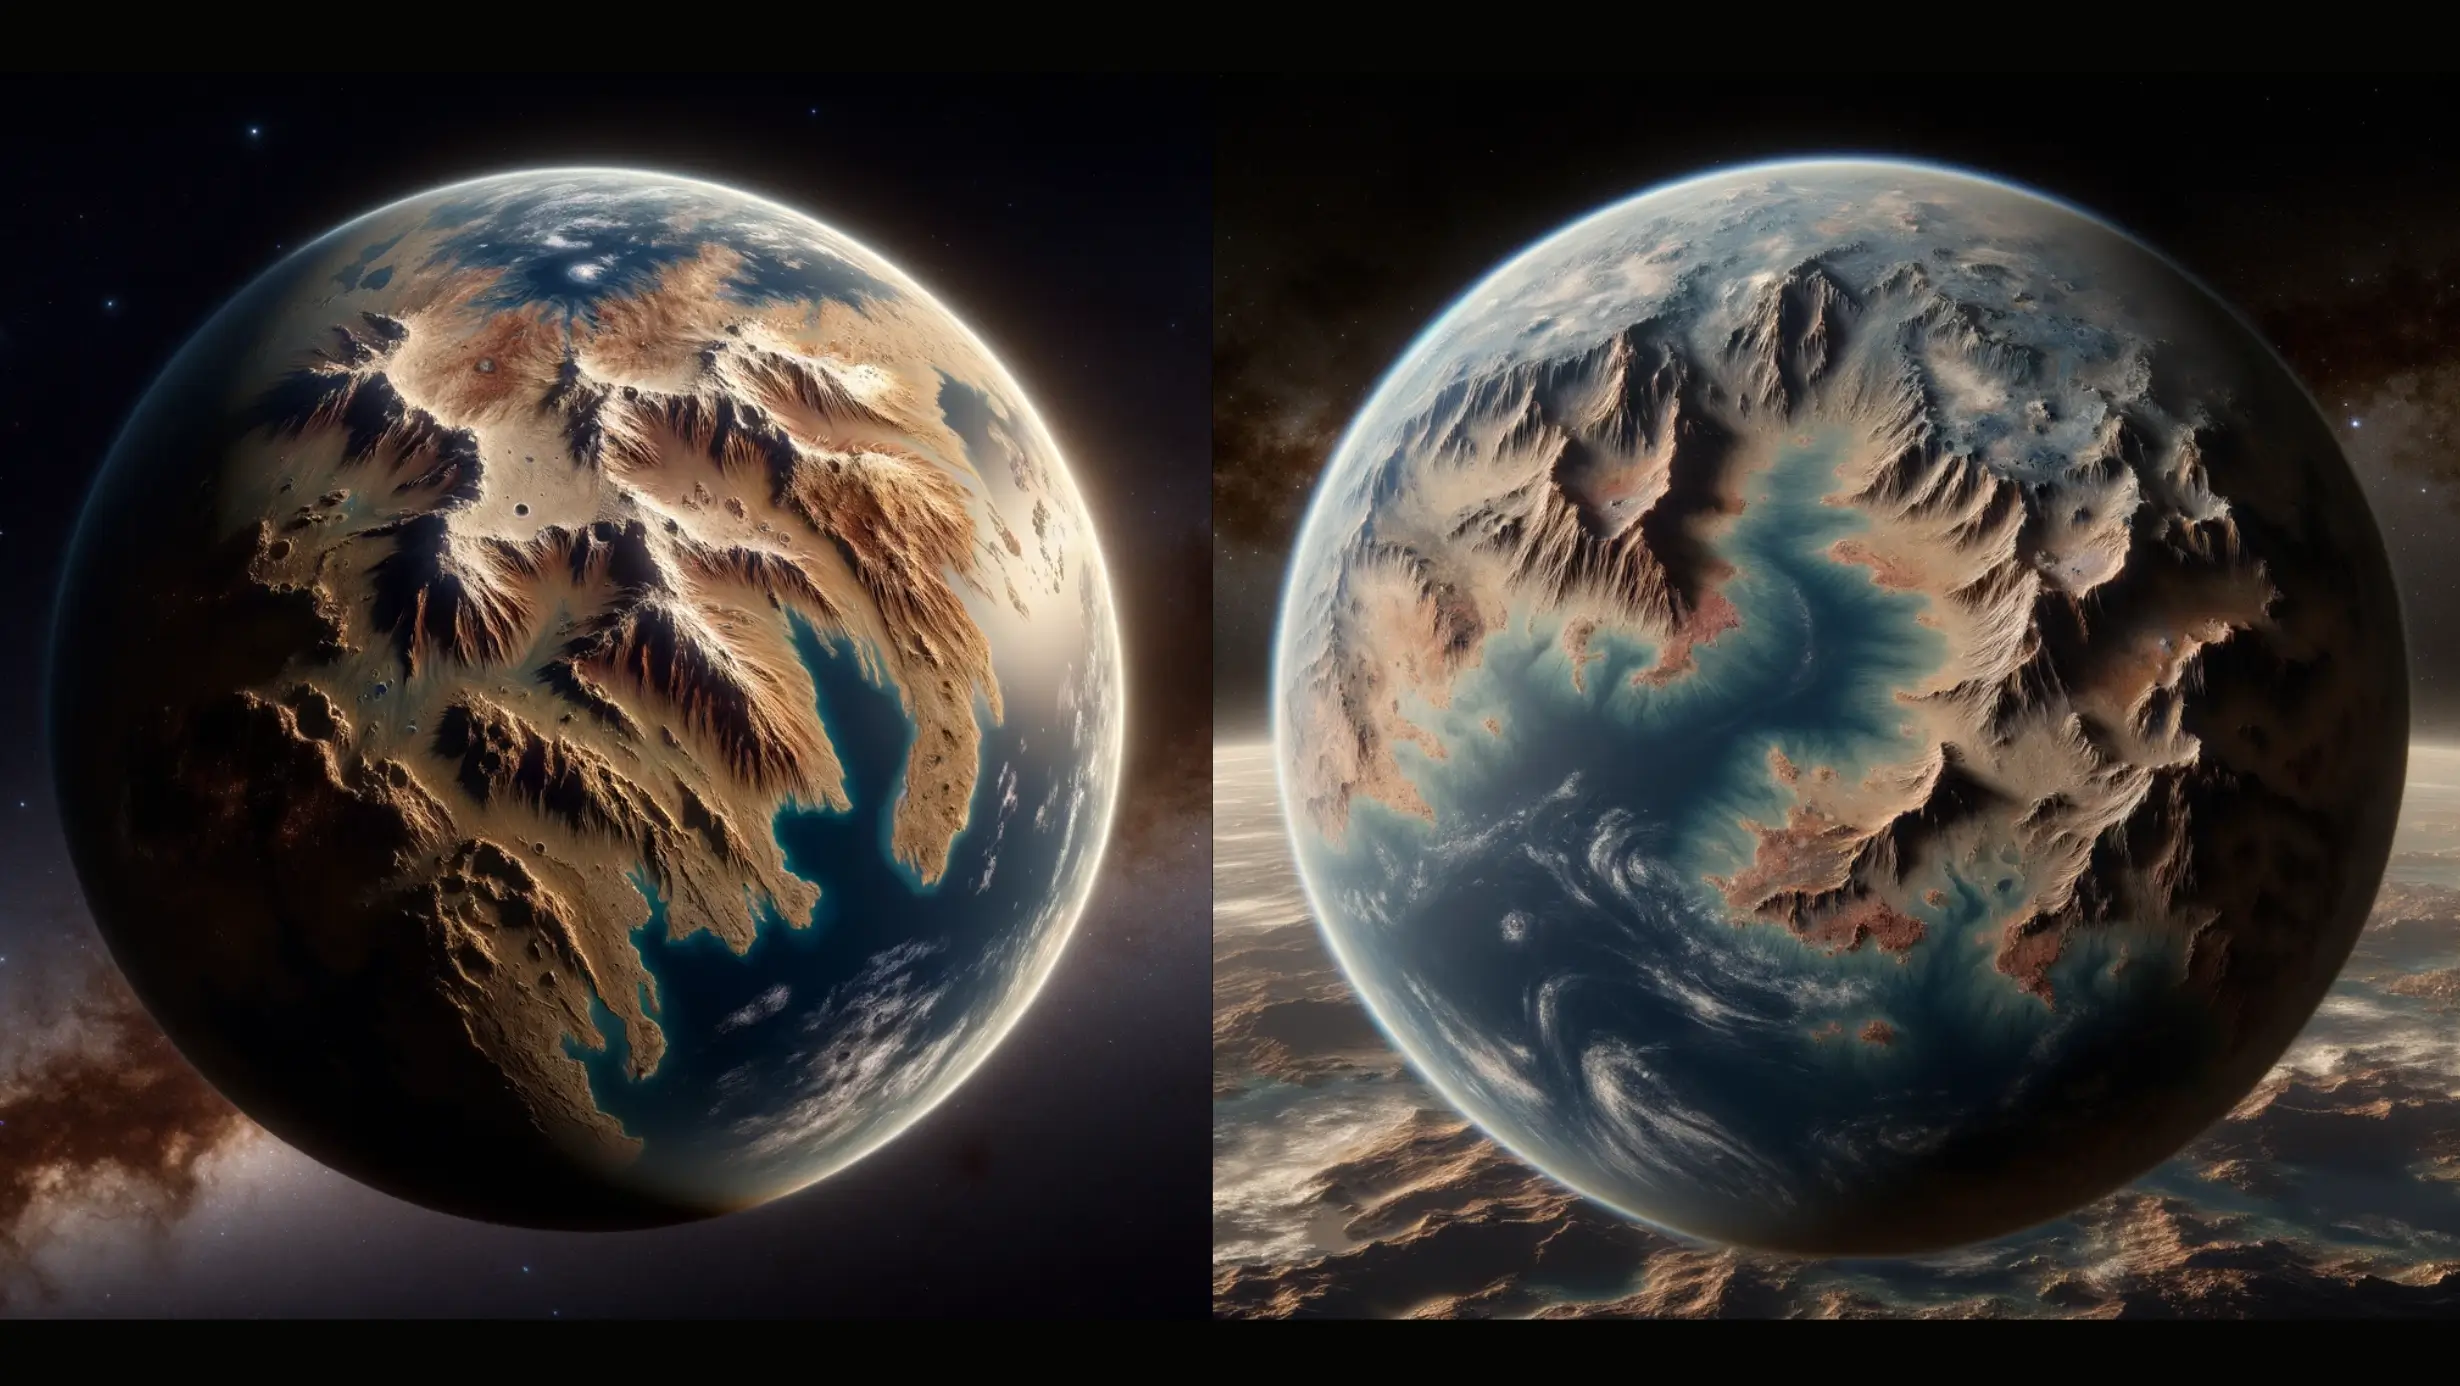 Artistic illustration of an earth like planet with water and rocks